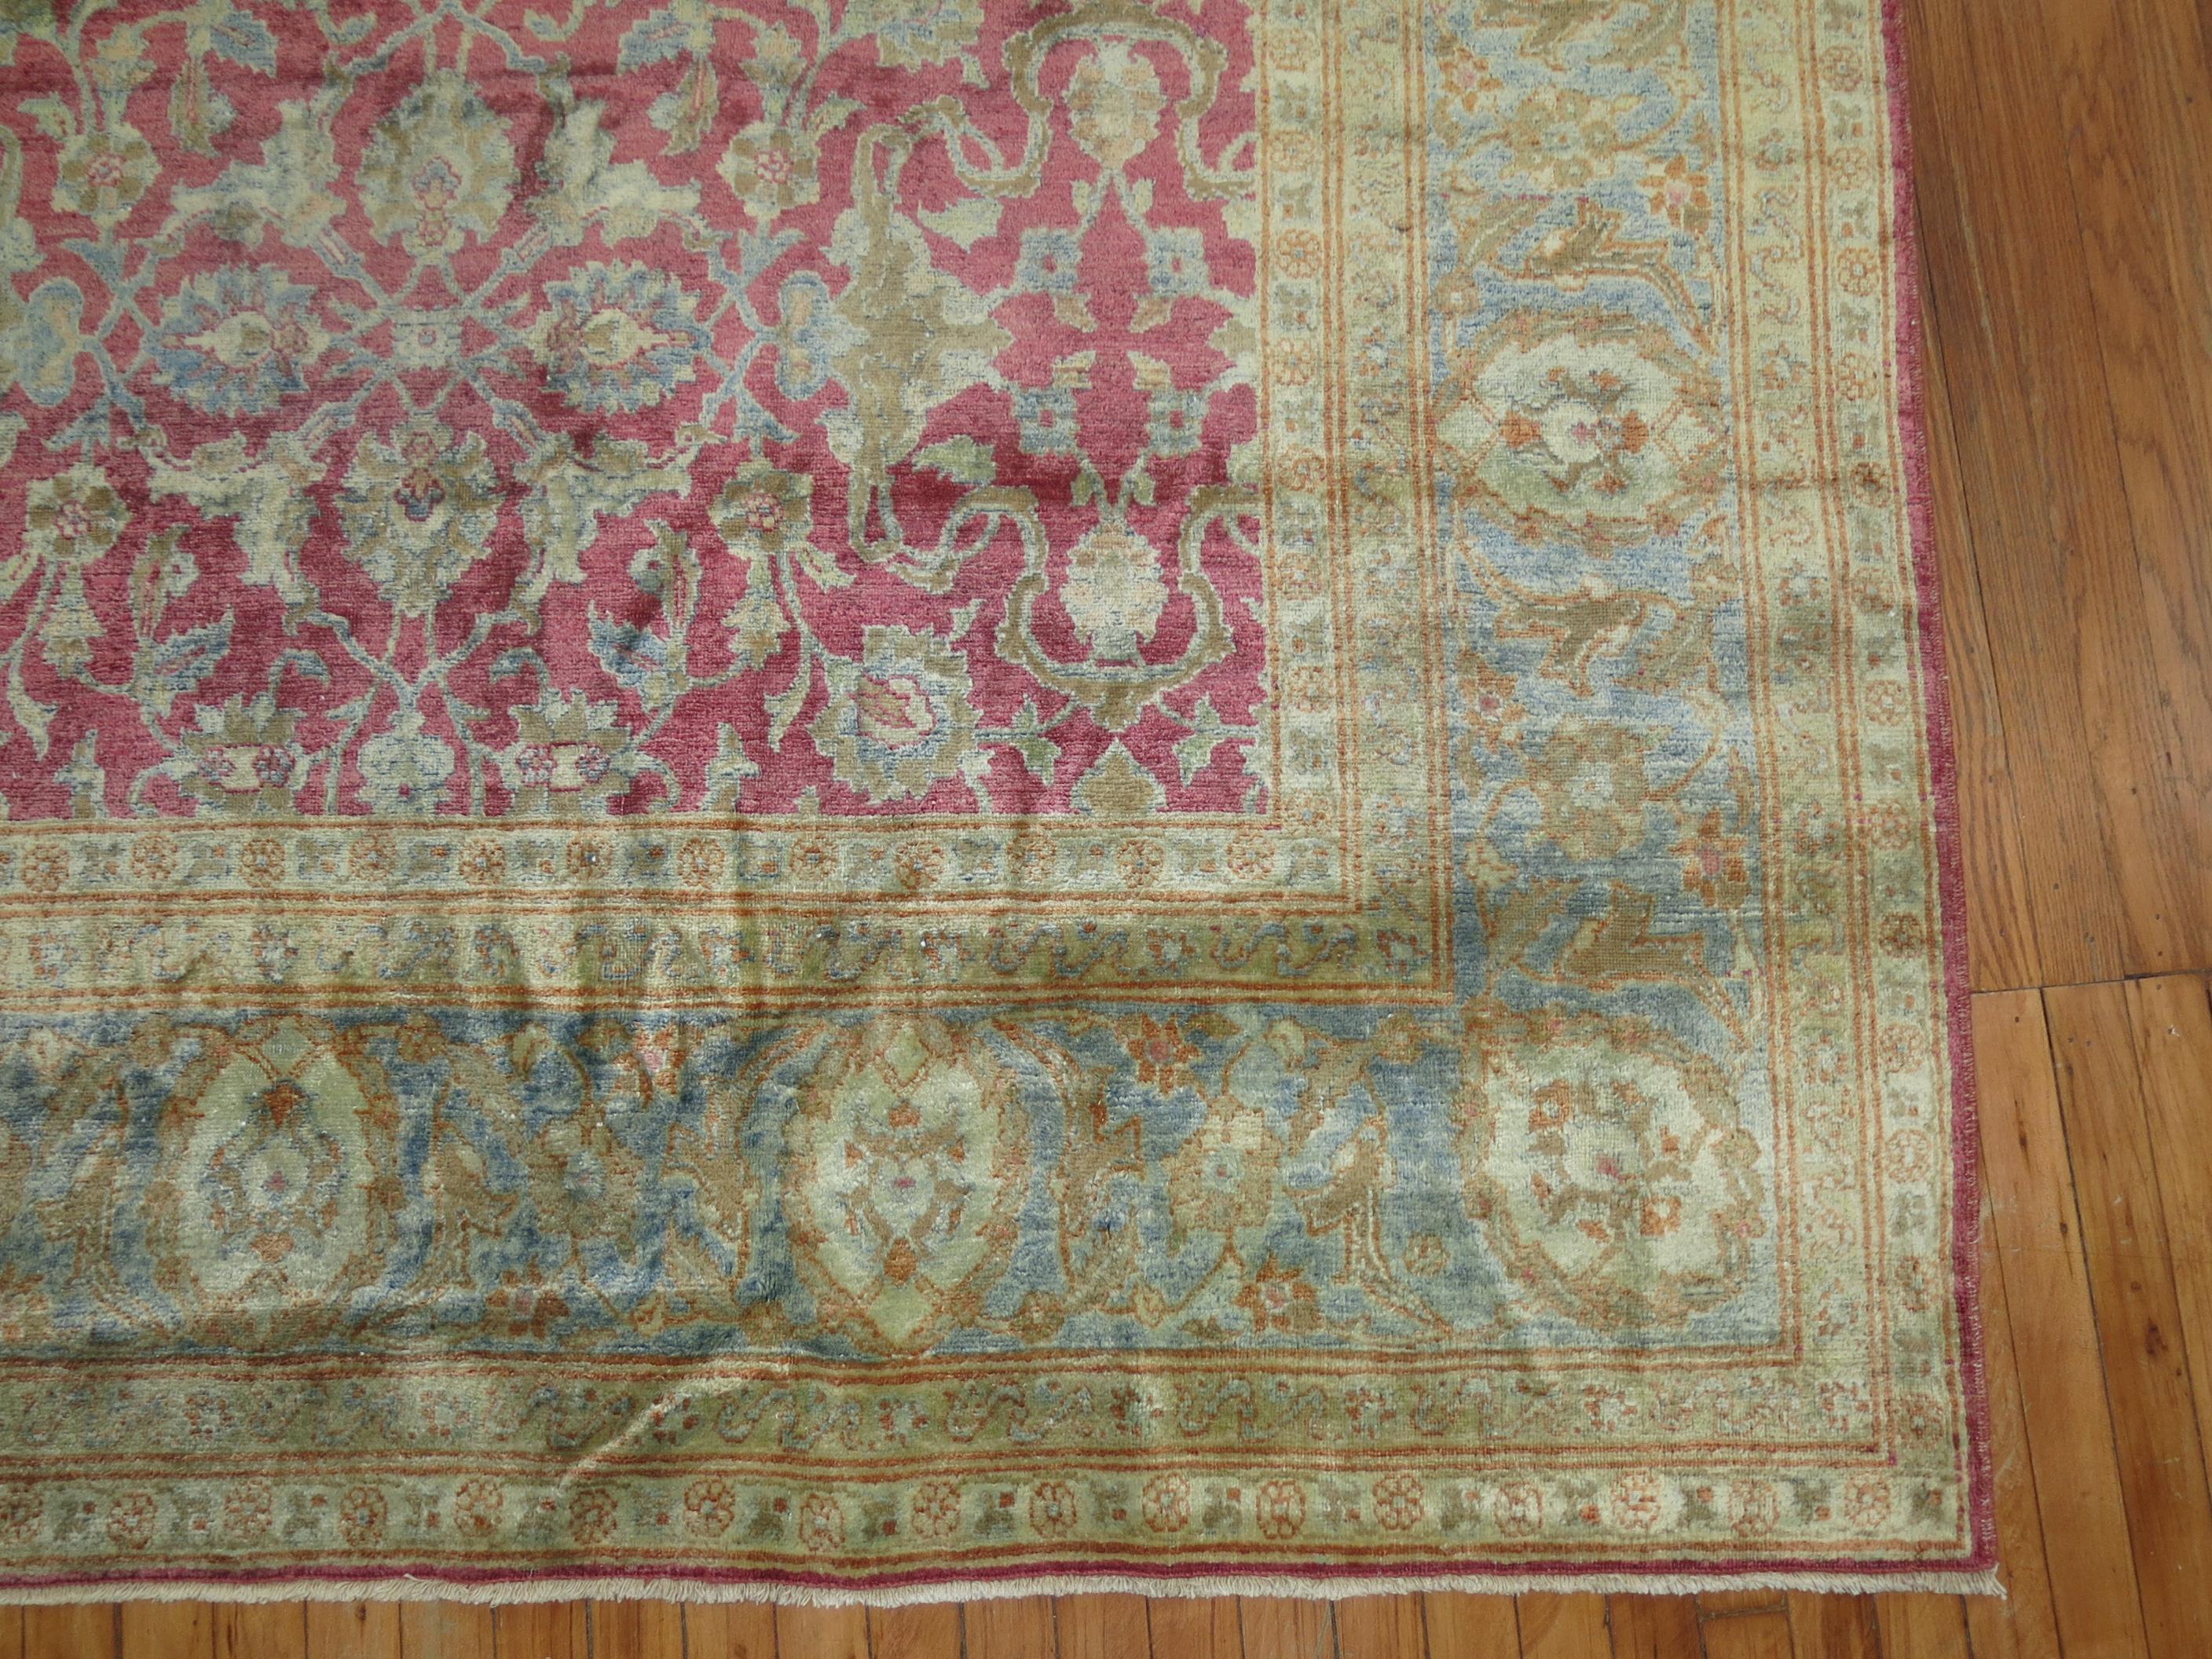 An all-over design Traditional Persian Tabriz rug with a blush raspberry pink ground and gray icy blue. The rug has a very soft silk sheen to it and soft on the feet.

Measures: 10' x 17'.